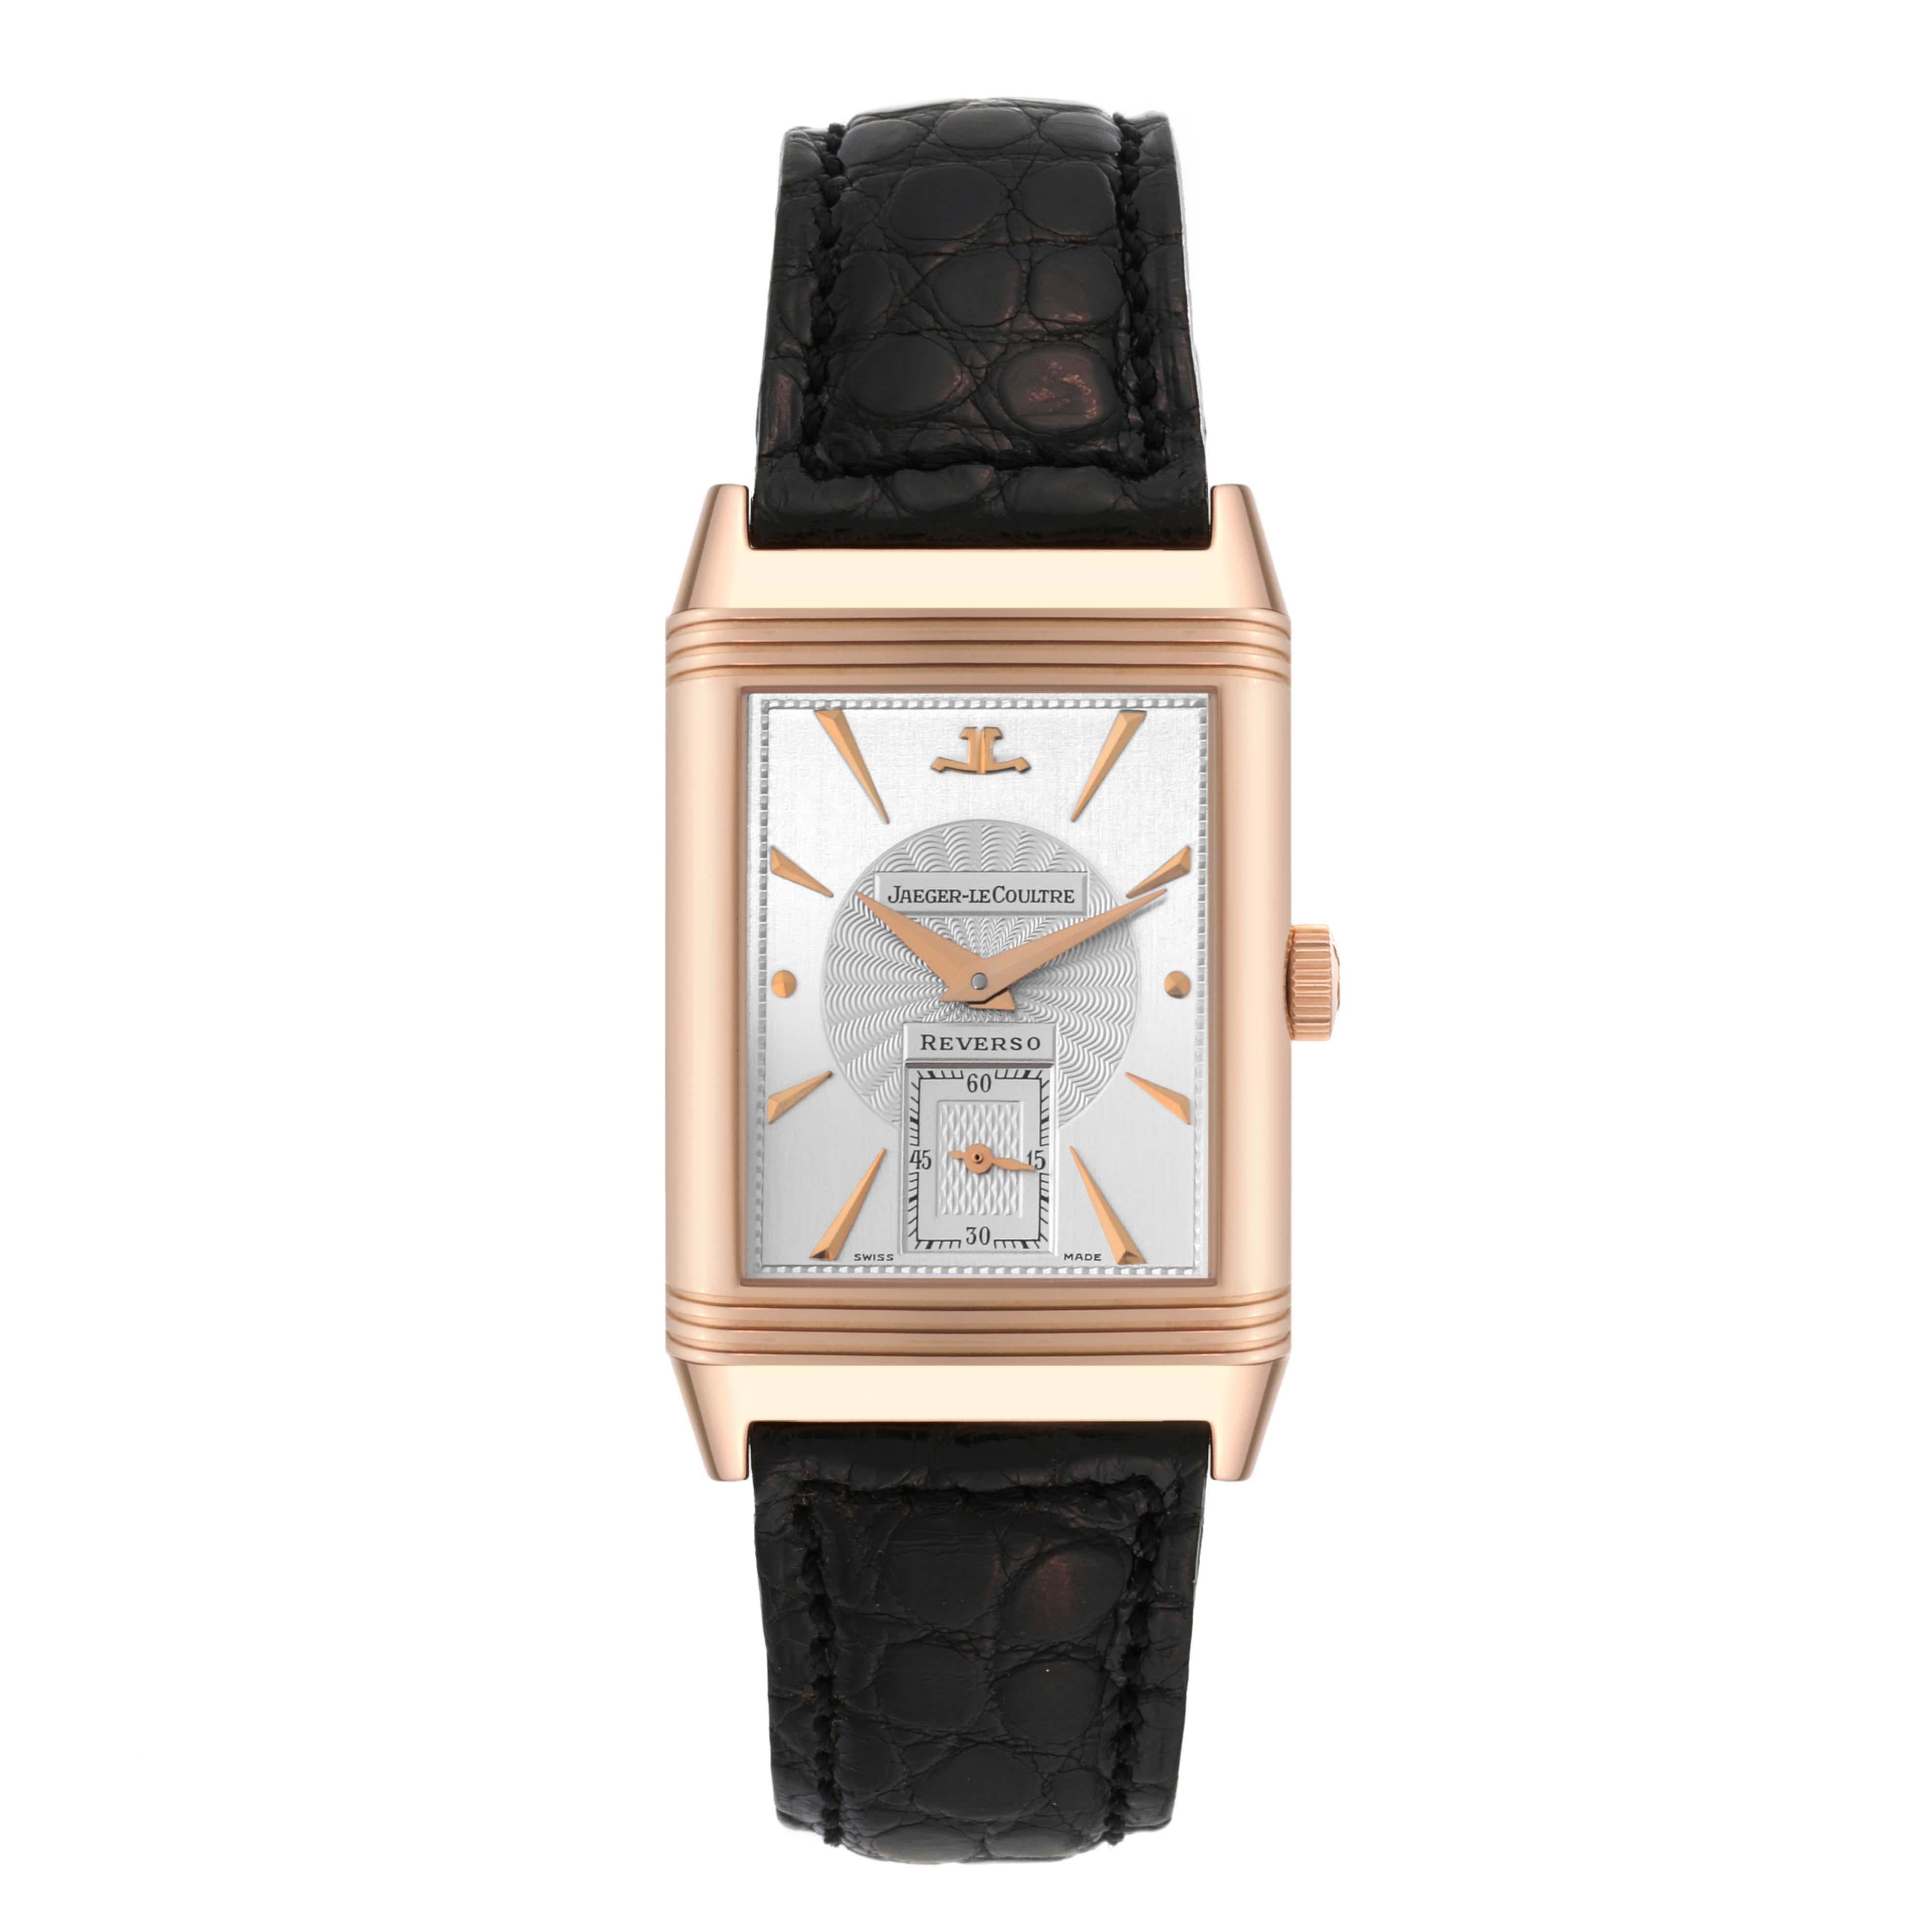 Jaeger LeCoultre Reverso Art Deco Rose Gold Silver Dial Mens Watch 270.2.62 For Sale 5